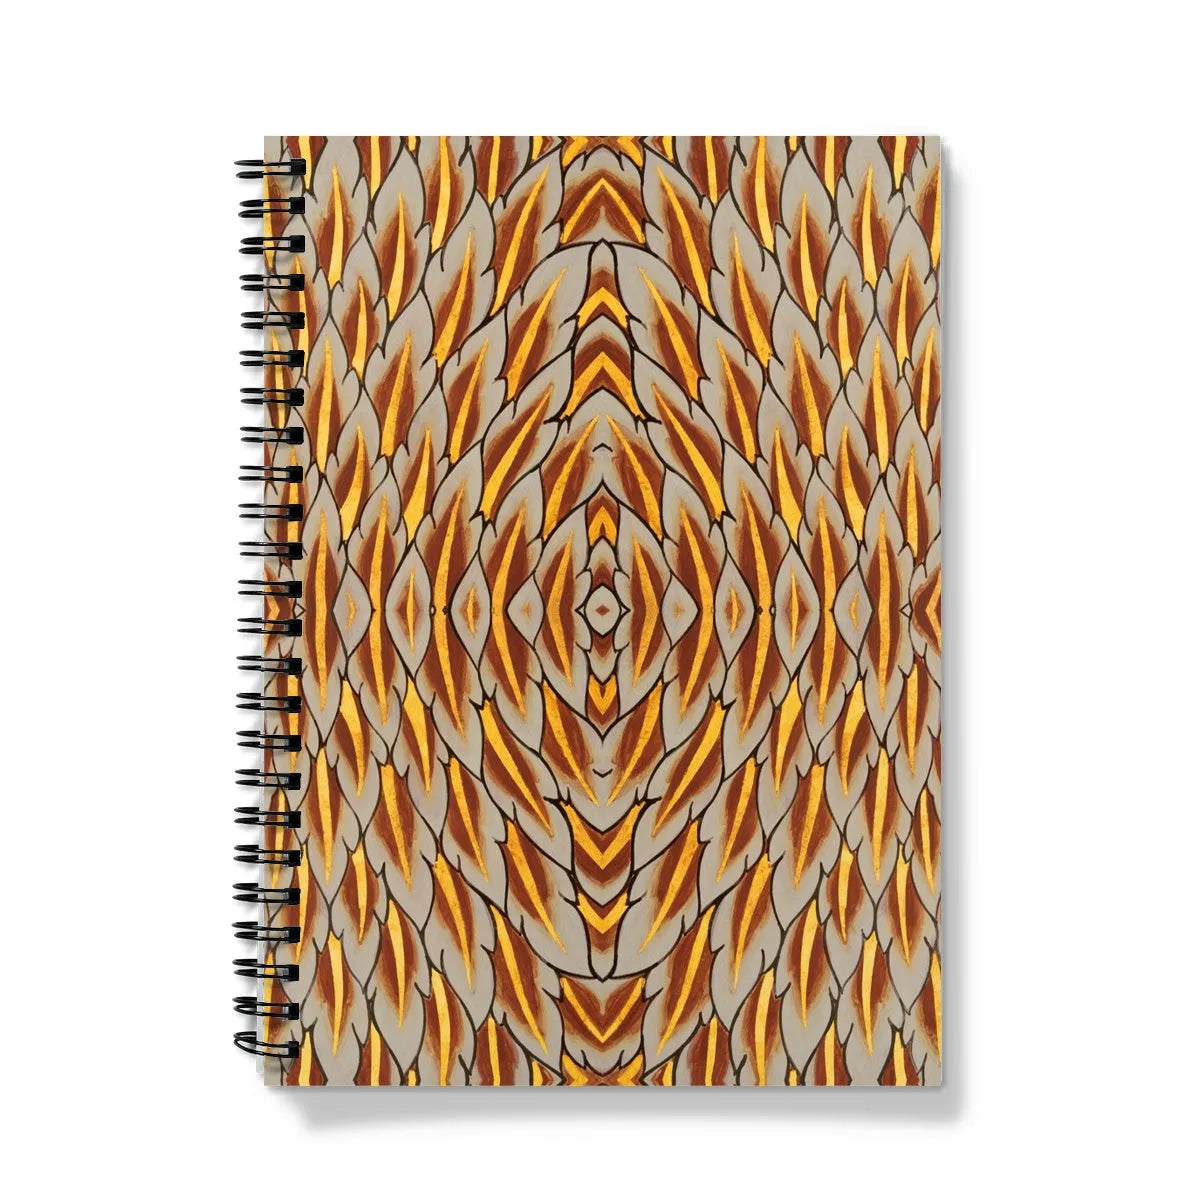 Featherweight Champion Notebook - Thai Garuda Feathers - A5 - Graph Paper - Notebooks & Notepads - Aesthetic Art